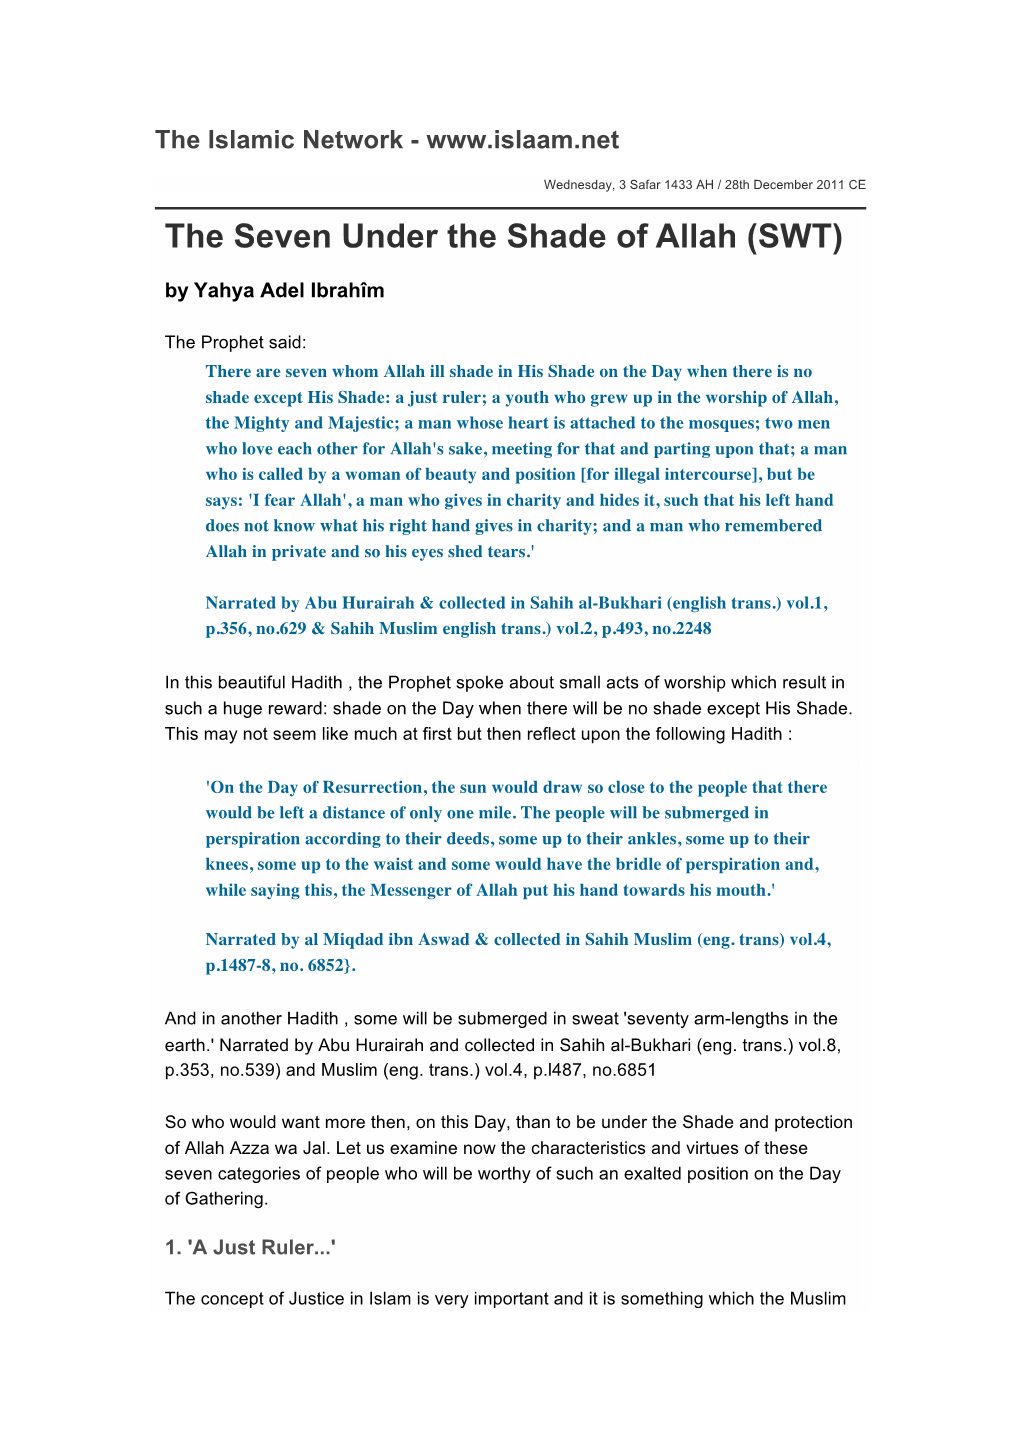 The Seven Under the Shade of Allah (SWT)